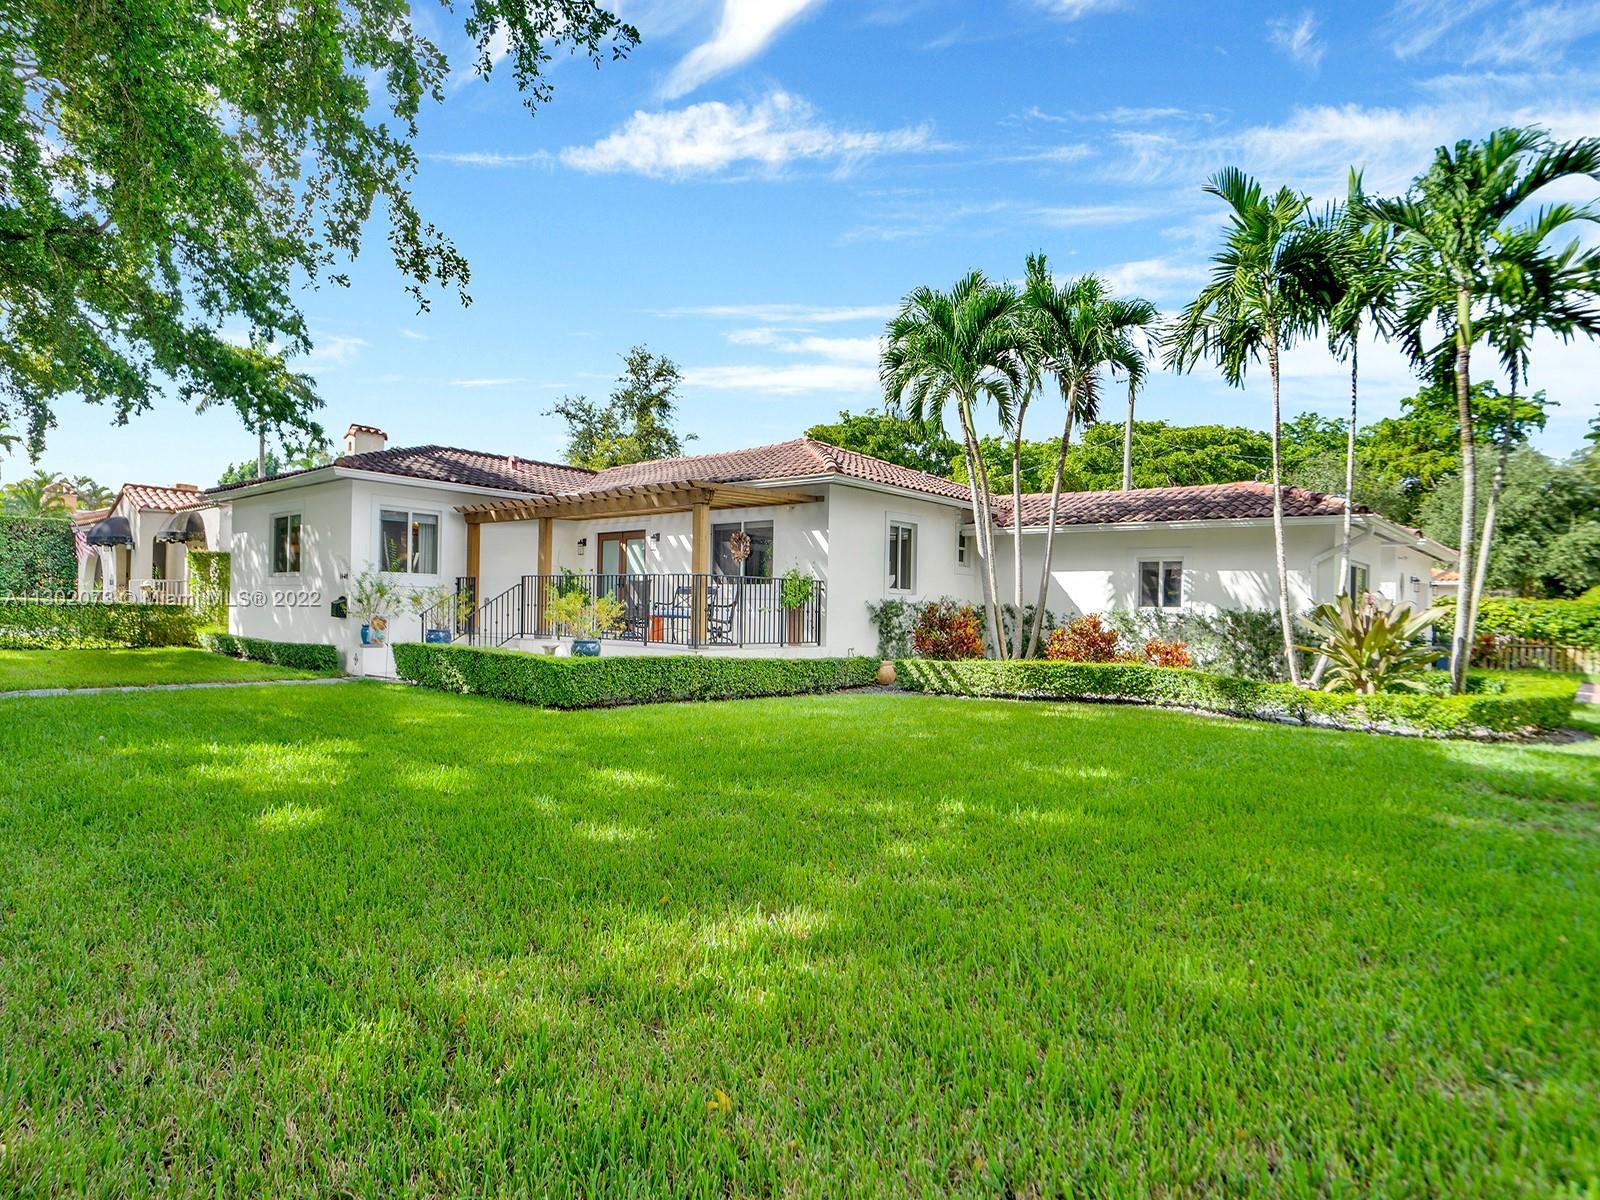 This unique Coral Gables pool home has been spaciously enlarged to a current 3 bedroom/3 bathroom split floor plan. This corner lot home sits on a 10,600 SF lot, w/ a master bedroom addition constructed in 2015. One of just 16 homes on Tangier Street, between Venetia and Milan, property is just north of the Granada Golf Course. Entry leads you to the living-dining area that overlooks the backyard patio/pool area. Pool was built in 2022 w/ a natural stone floor layout & features a salt-chlorinator & LED lighting. Master bedroom has a sitting area & custom closet. 2nd bedroom has a full bathroom. Galley kitchen leads to a spacious family room that has access to the backyard & covered path to laundry room/garage. Impact/window protection w/doors throughout. MOVE IN CONDITION.